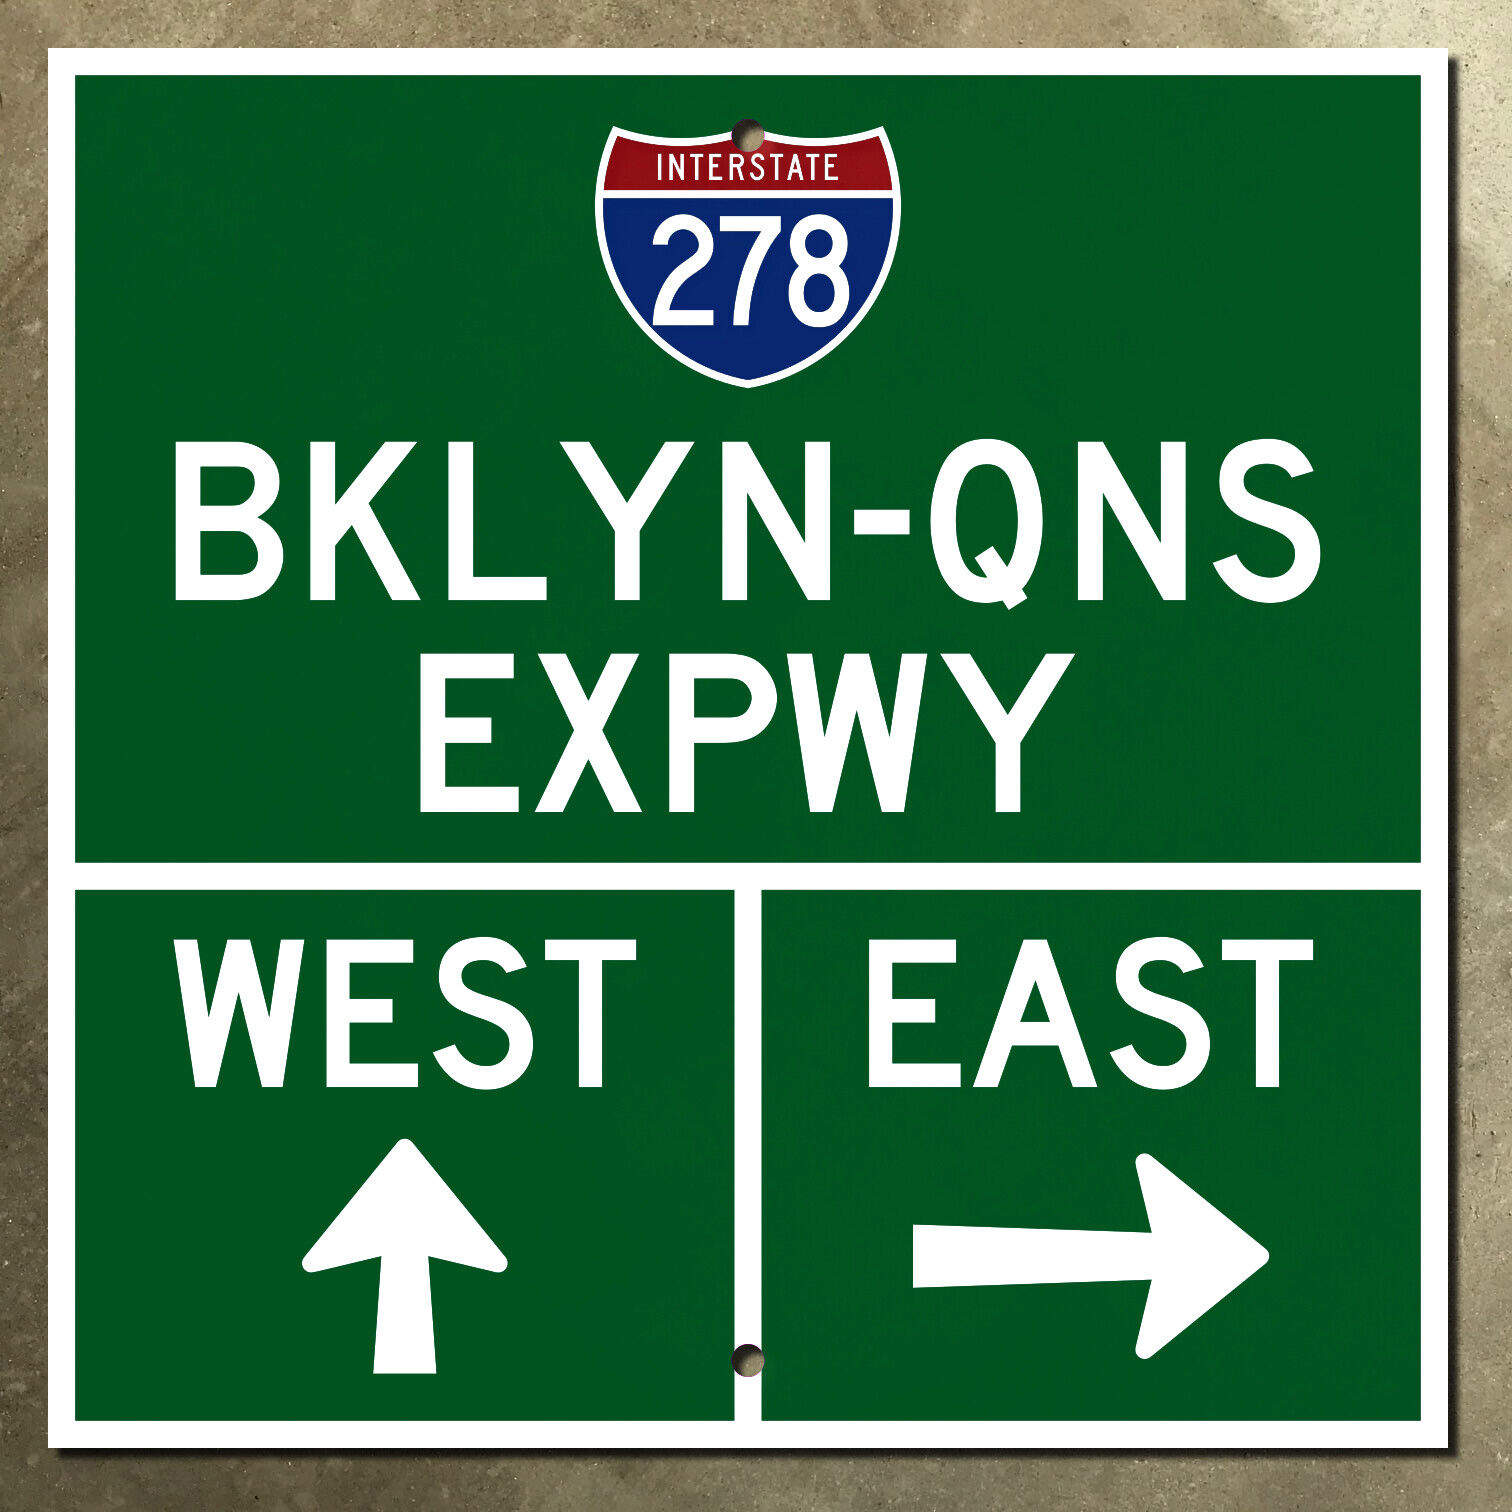 New York City Brooklyn Queens Expressway highway marker road sign 1965 NYC 5x5